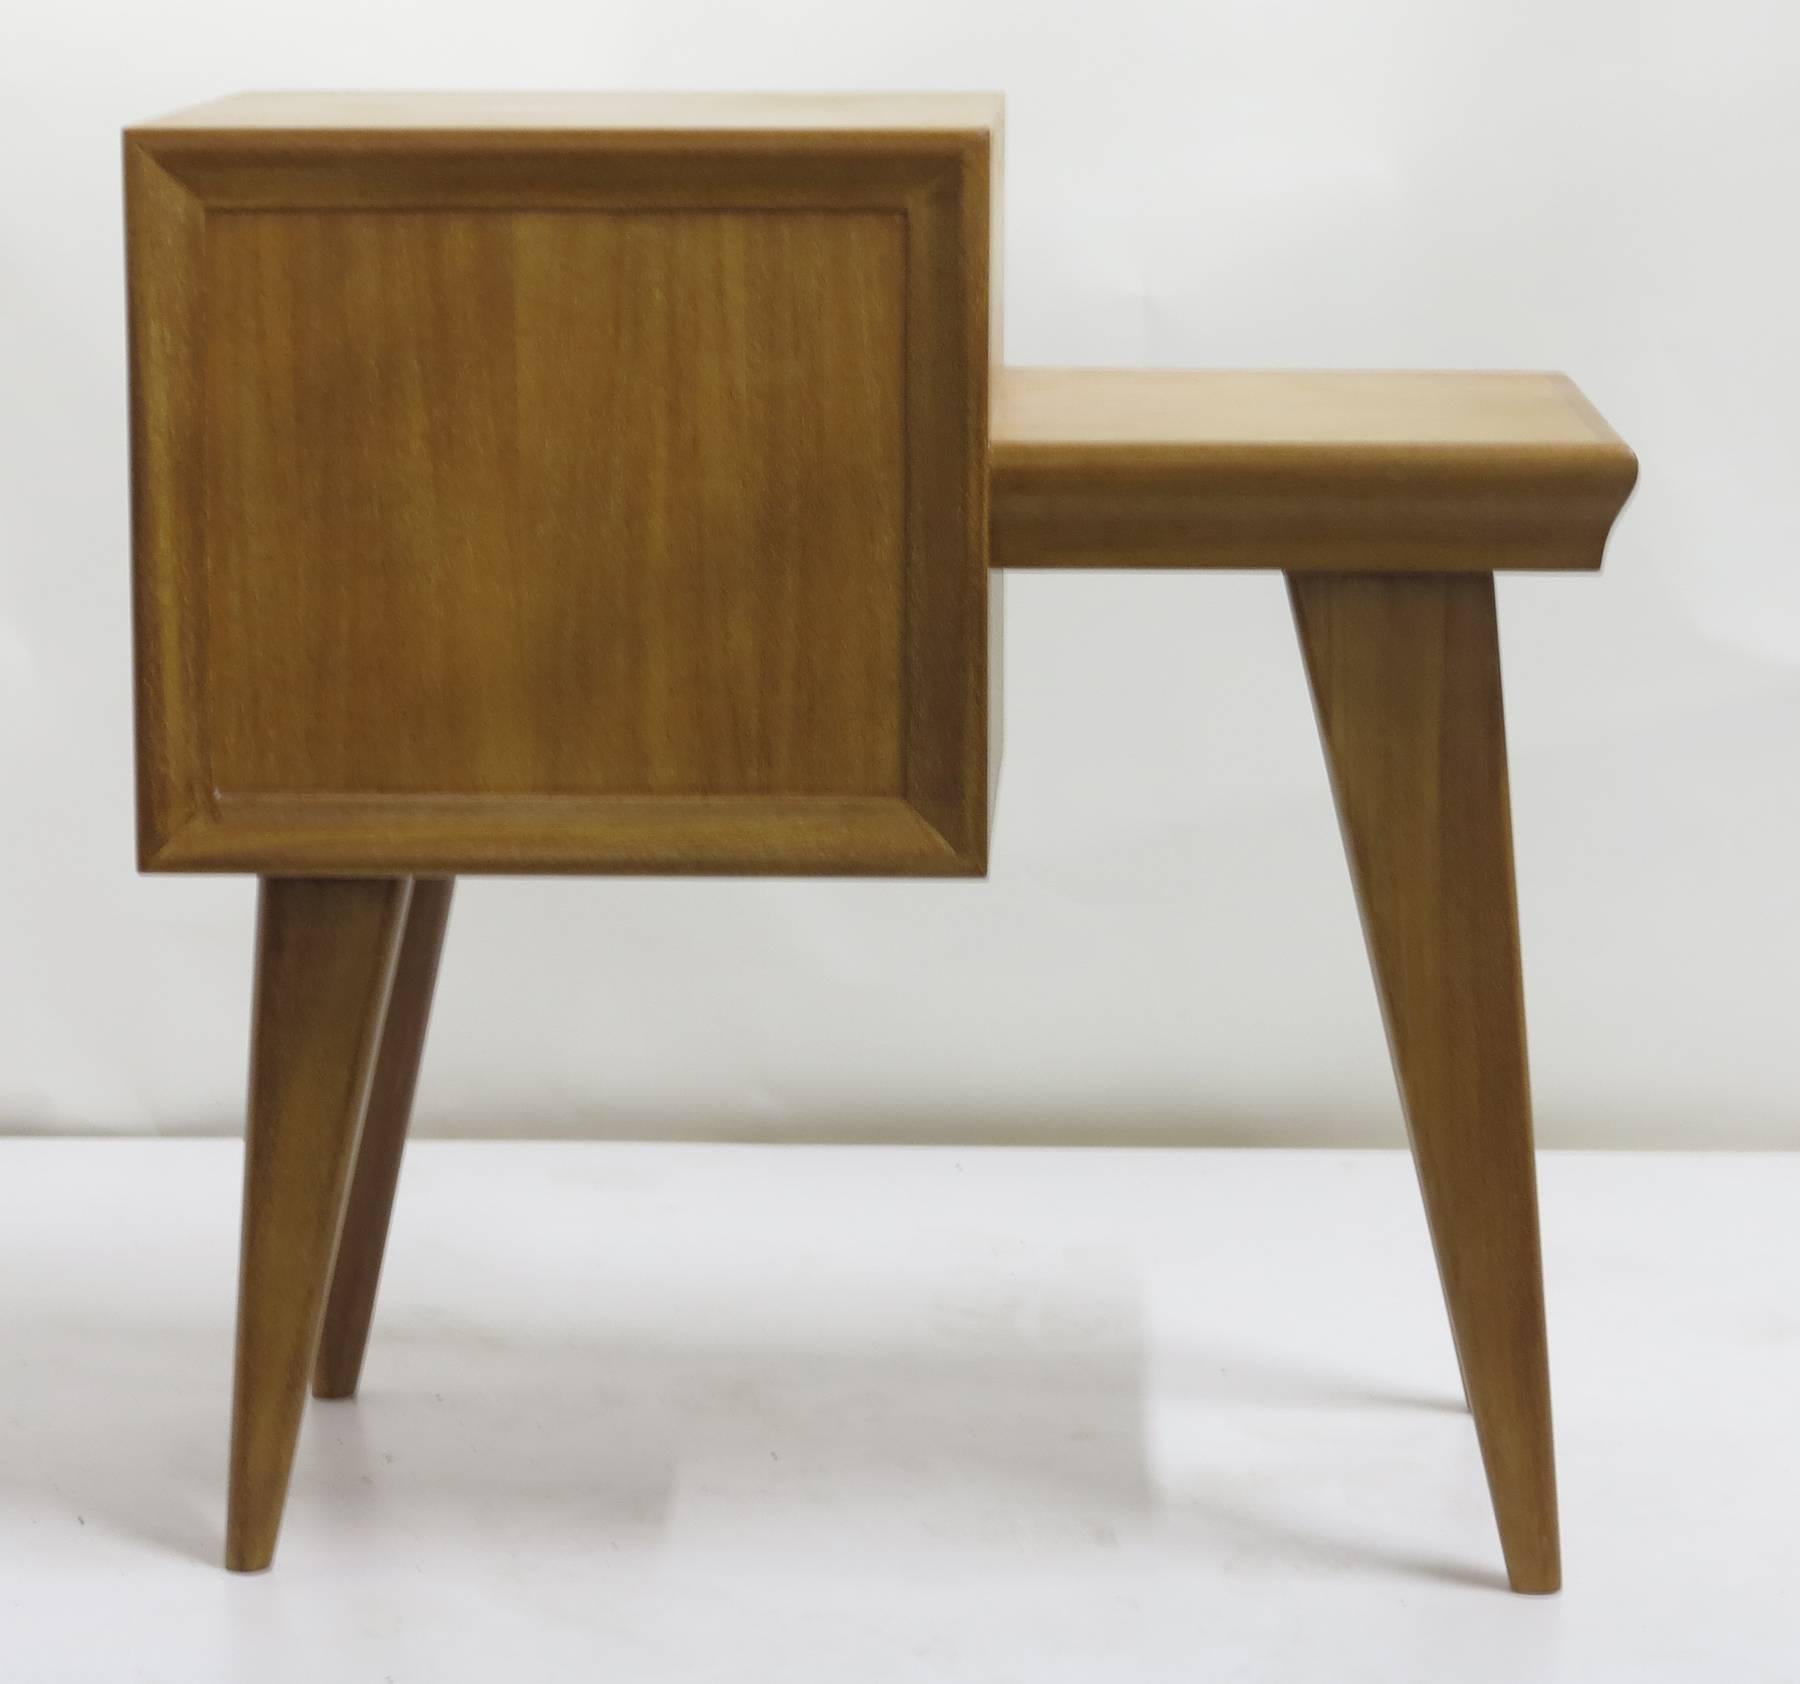 Mid-20th Century Bleached Mahogany End Tables 1950s